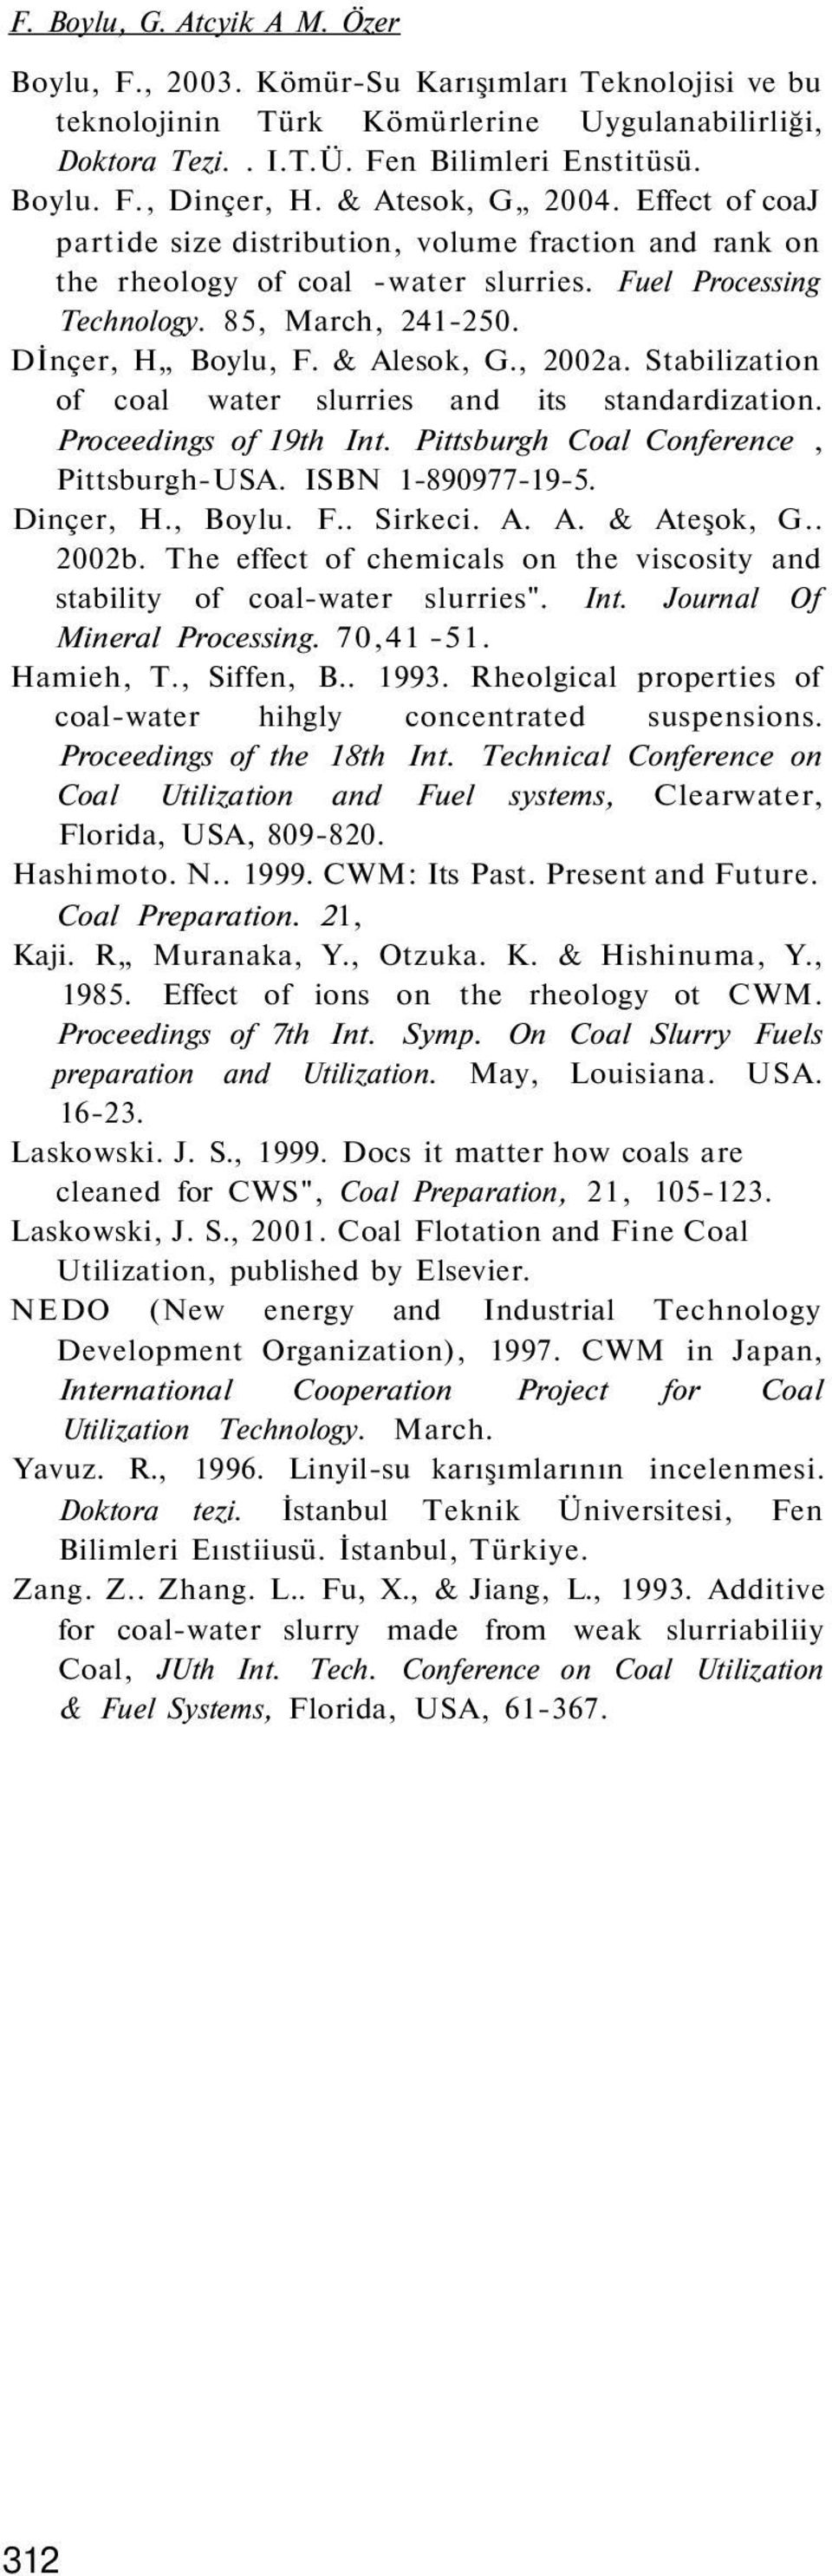 & Alesok, G., 2002a. Stabilization of coal water slurries and its standardization. Proceedings of 19th Int. Pittsburgh Coal Conference, Pittsburgh-USA. ISBN 1-890977-19-5. Dinçer, H., Boylu. F.